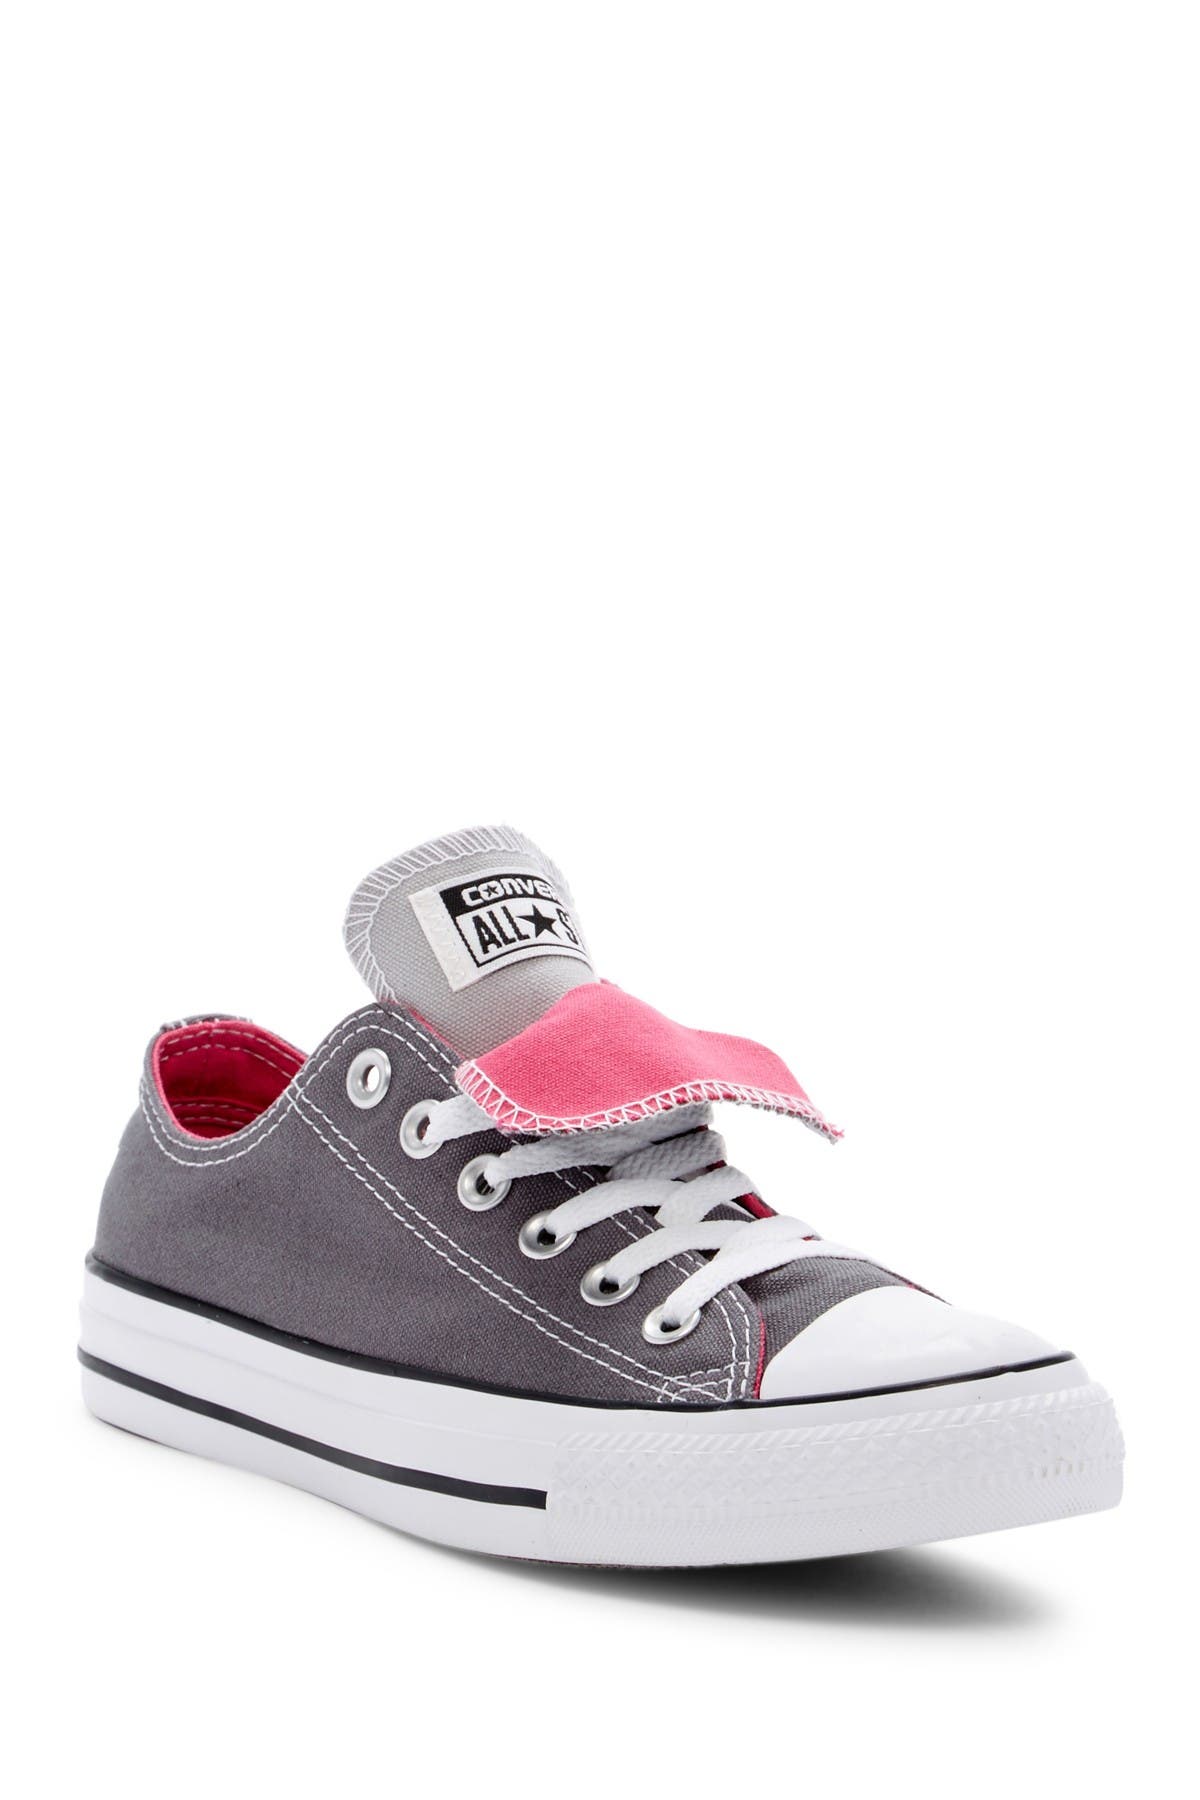 Converse | Chuck Taylor All Star Double 